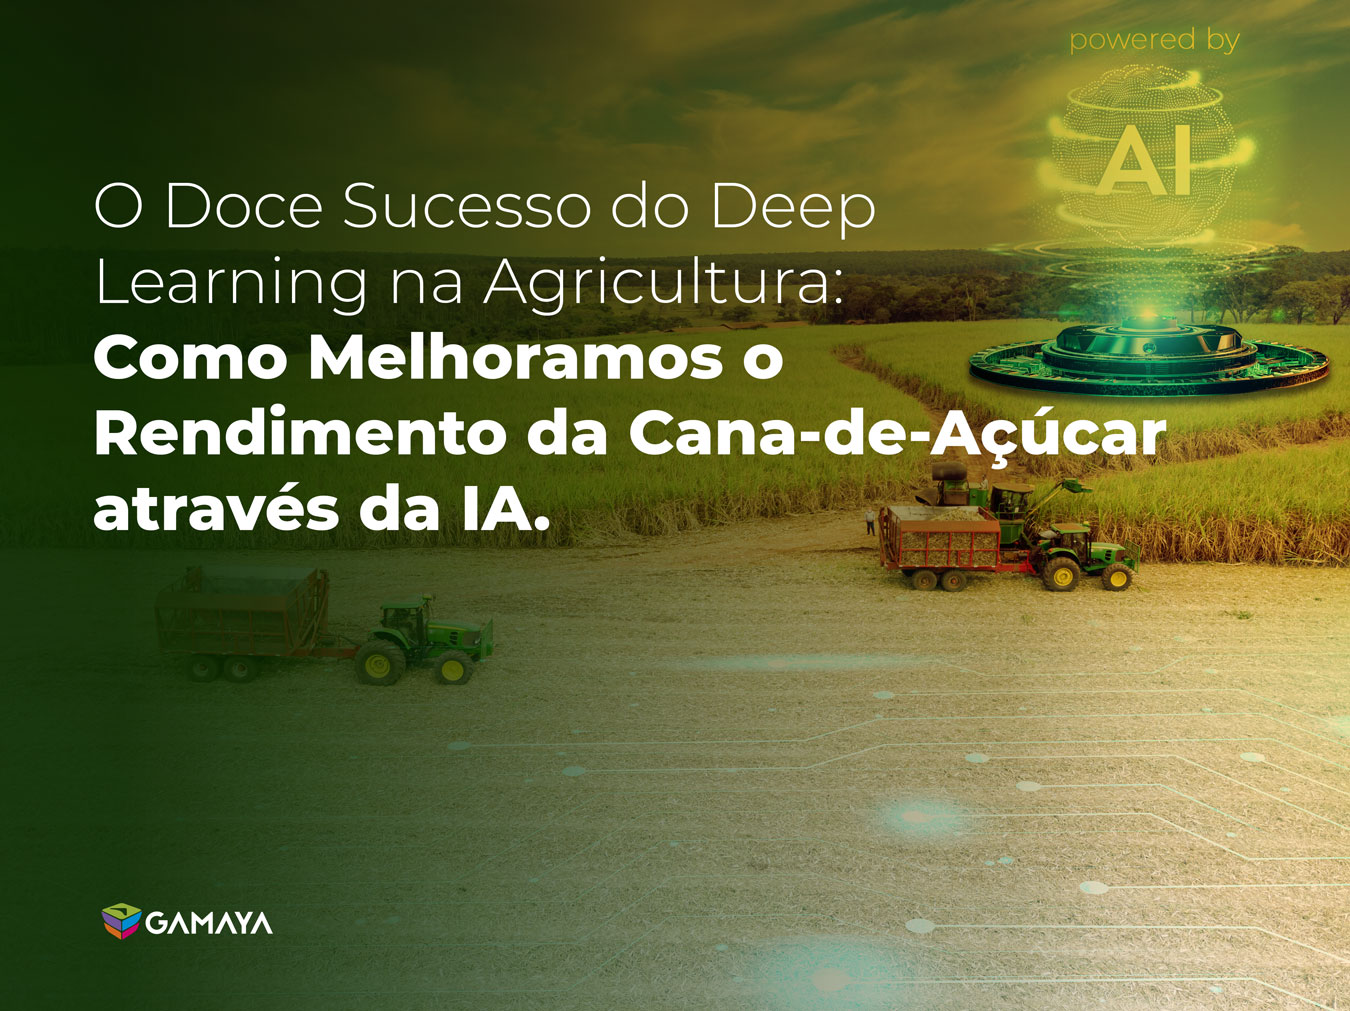 O-Doce-Sucesso-do-Deep-Learning-na-Agricultura